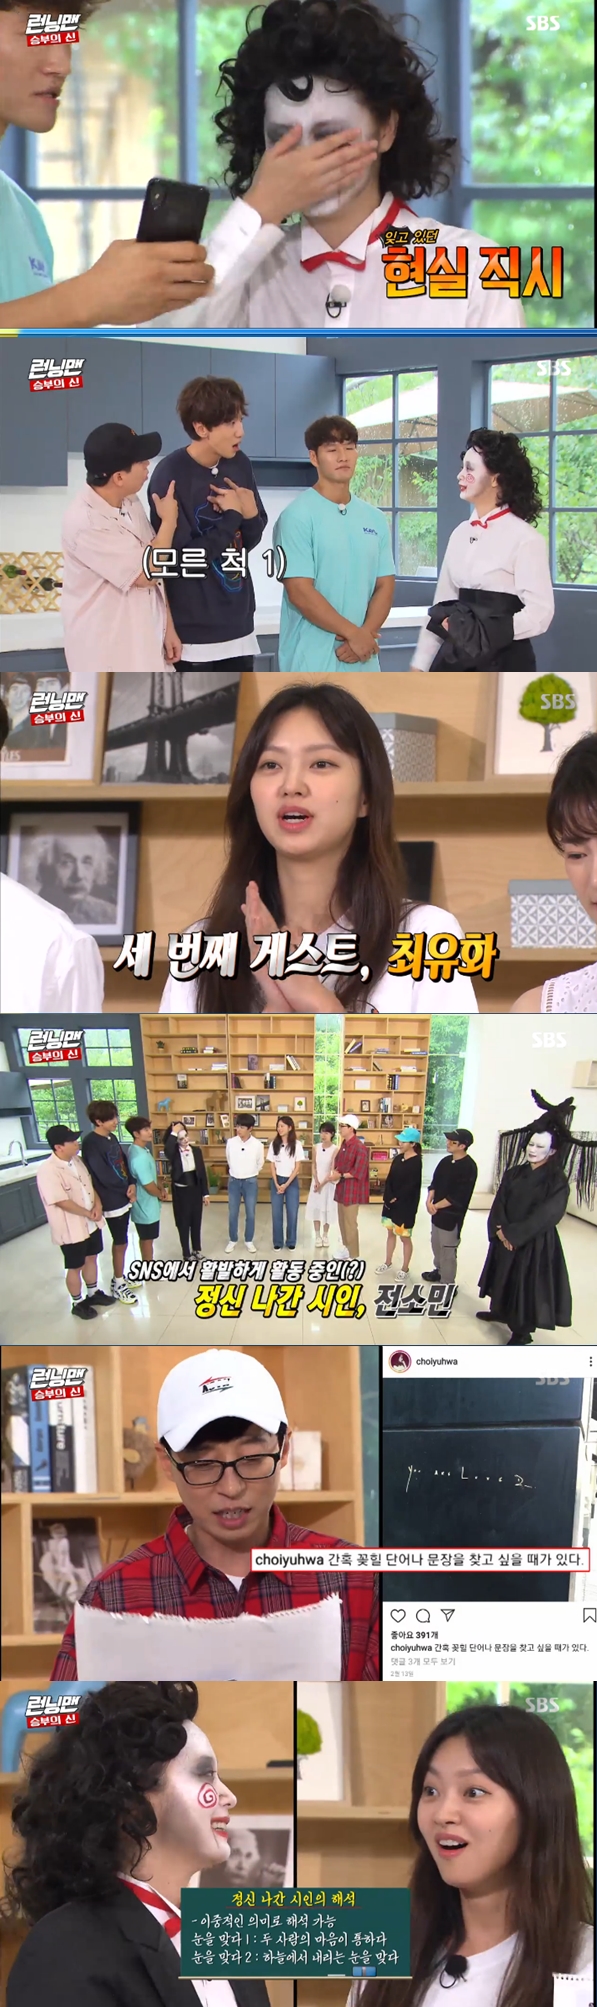 Jeon So-min met his comrade.On SBS entertainment Running Man broadcasted on the afternoon of the 25th, Tazza: The High Rollers One Eyed Jack starring actors Park Jung-min, Lim Ji-yeon and Choi You-Wha came out as guests and performed God of Victory Race with the members.Yoo Jae-Suk introduced Choi You-Wha and introduced her as overloaded like Jeon So-min.Choi You-Wha also posted emotional posts on social media like Jeon So-min, one of which Yoo Jae-Suk read to members.When I heard a poem with a small Choi You-Wha, the members wondered, but Jeon So-min surprised everyone by accurately grasping her intentions.Jeon So-min was happy to see Choi You-Whas SNS poem and said, We have something to do.When I saw the two people sympathize with each other, Lee Kwang-soo laughed, saying, Is there really something between the stone children?